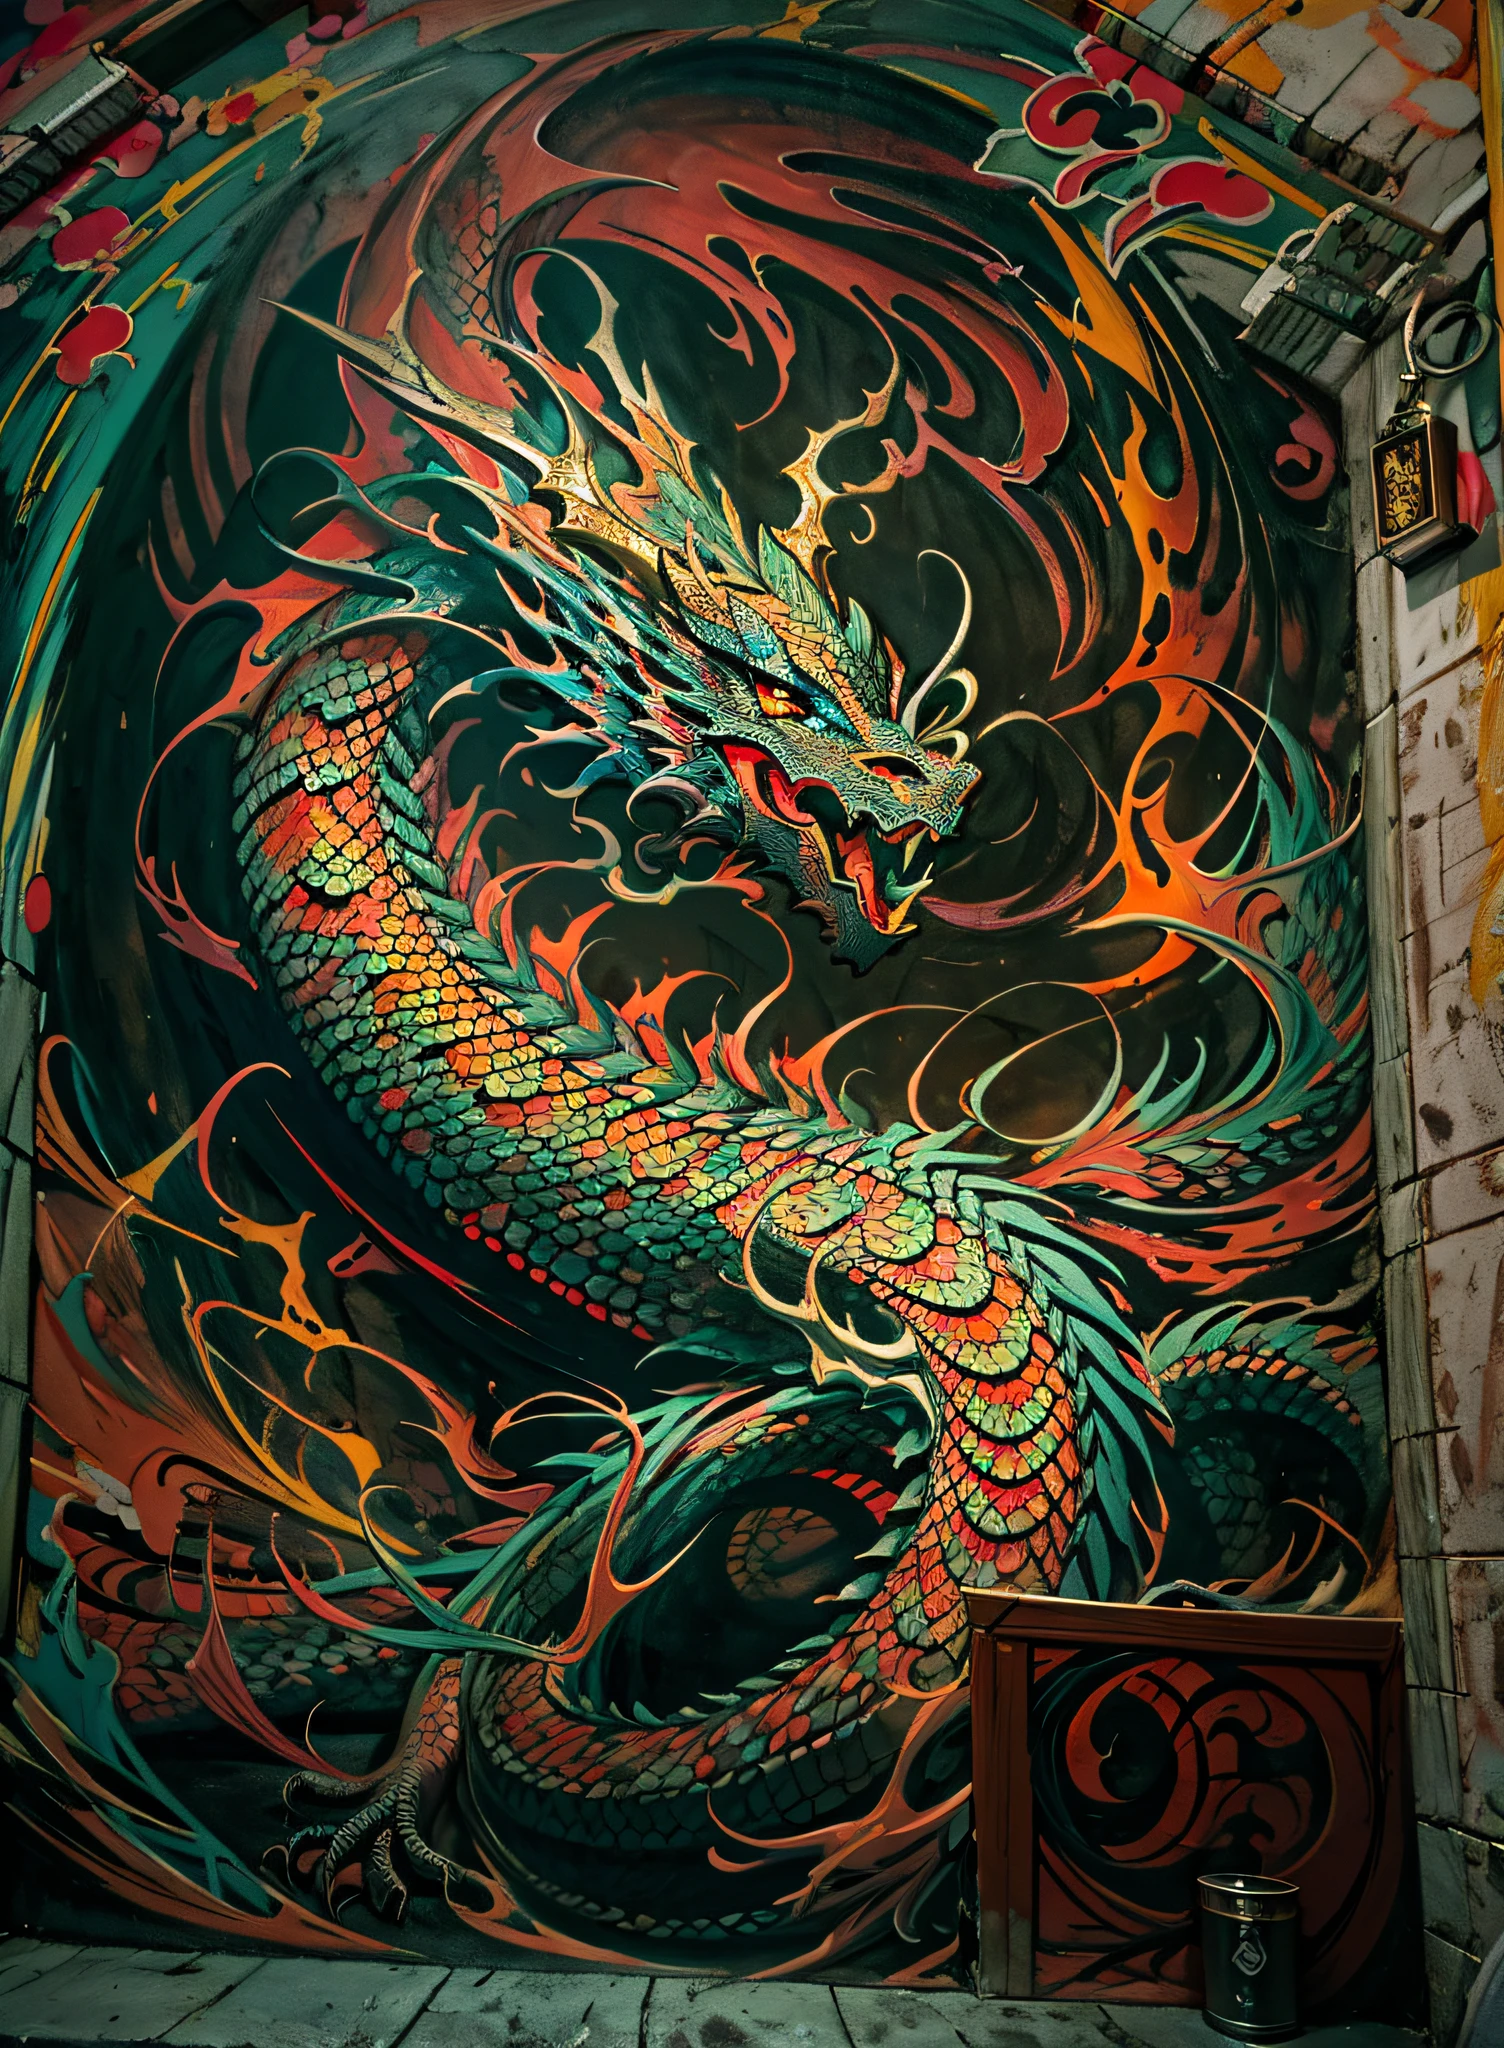 Dragoned, clair obscur,2.5D cinematic scene - filmed in the dark), oriental dragon high resolution mural painting,((walls of a castle)), colorful graffiti,((clair obscur)) and vivid, swirly vibrant colors, expressive brushstrokes, street art vibe.clair obscur,2.5D.